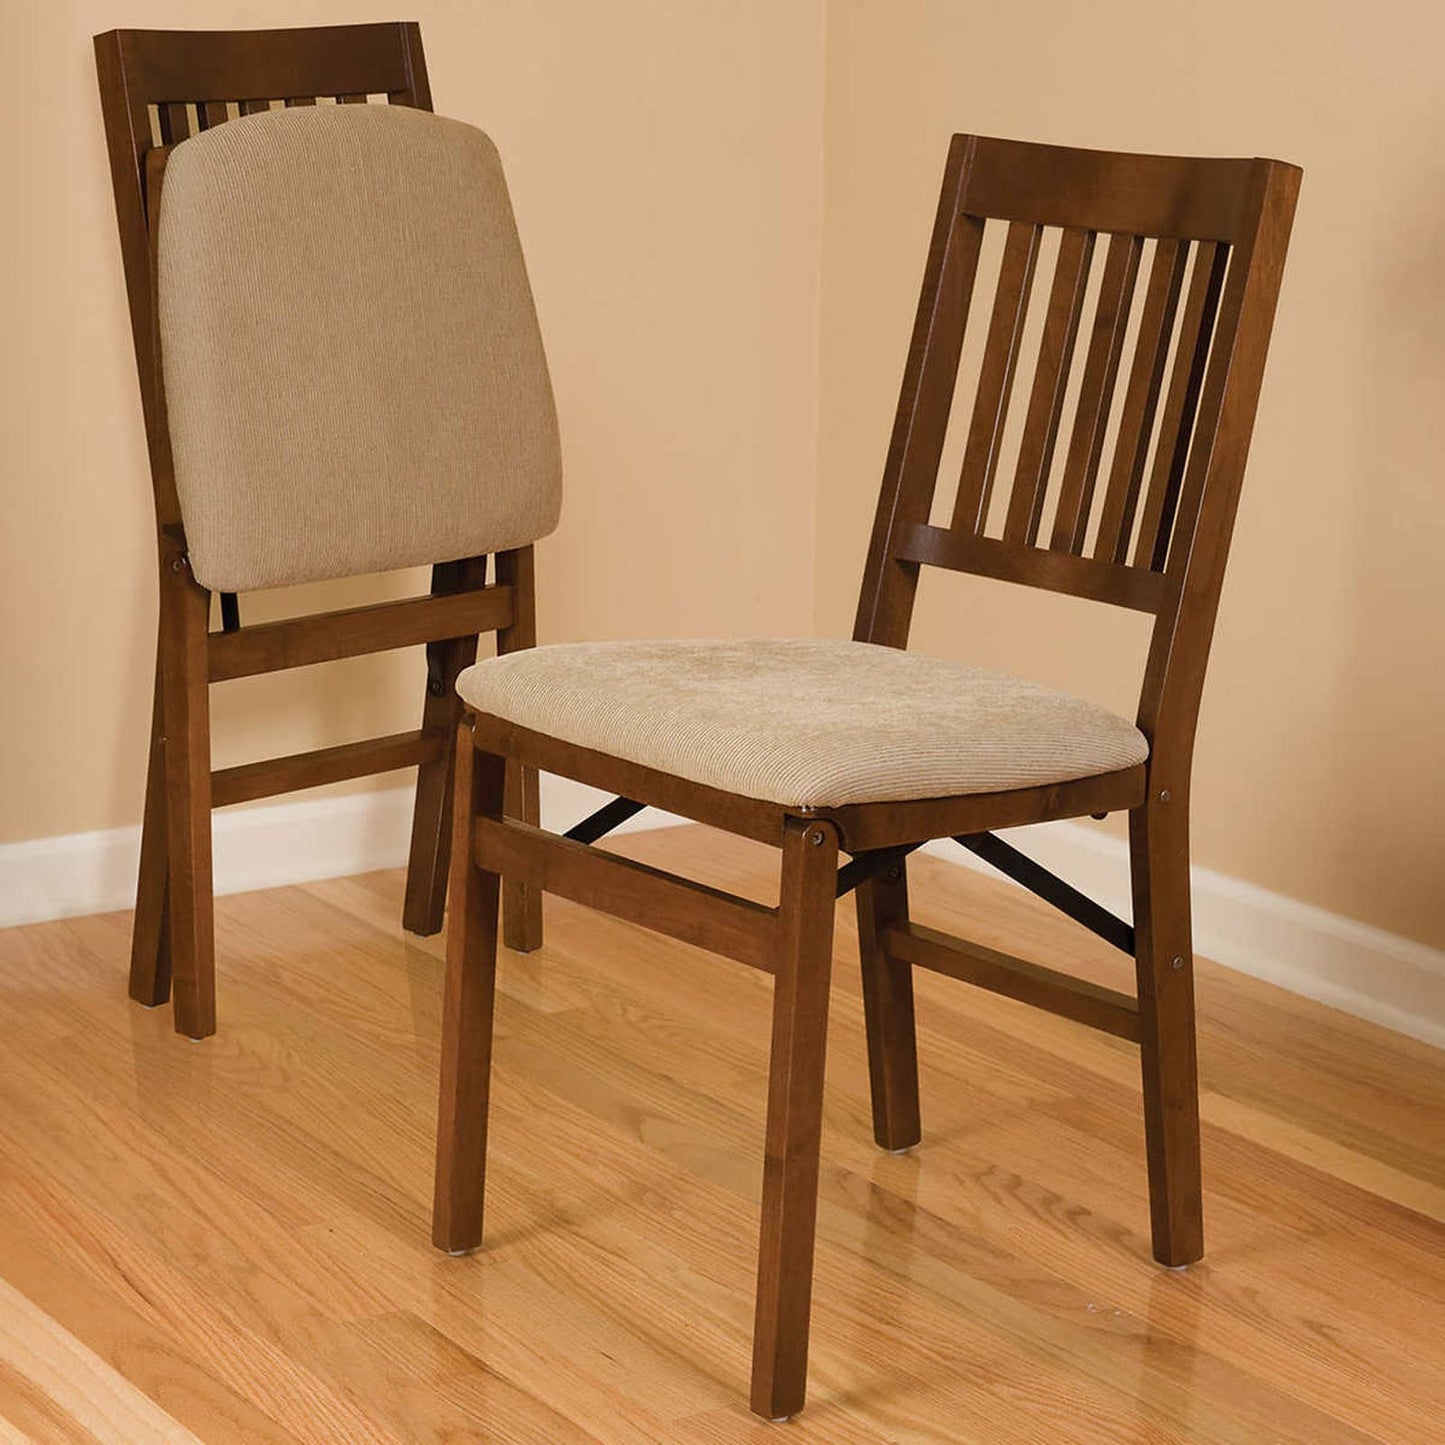 Costco - Stakmore Wood Upholstered Folding Chair, Fruitwood, 2-pack - Retail $99